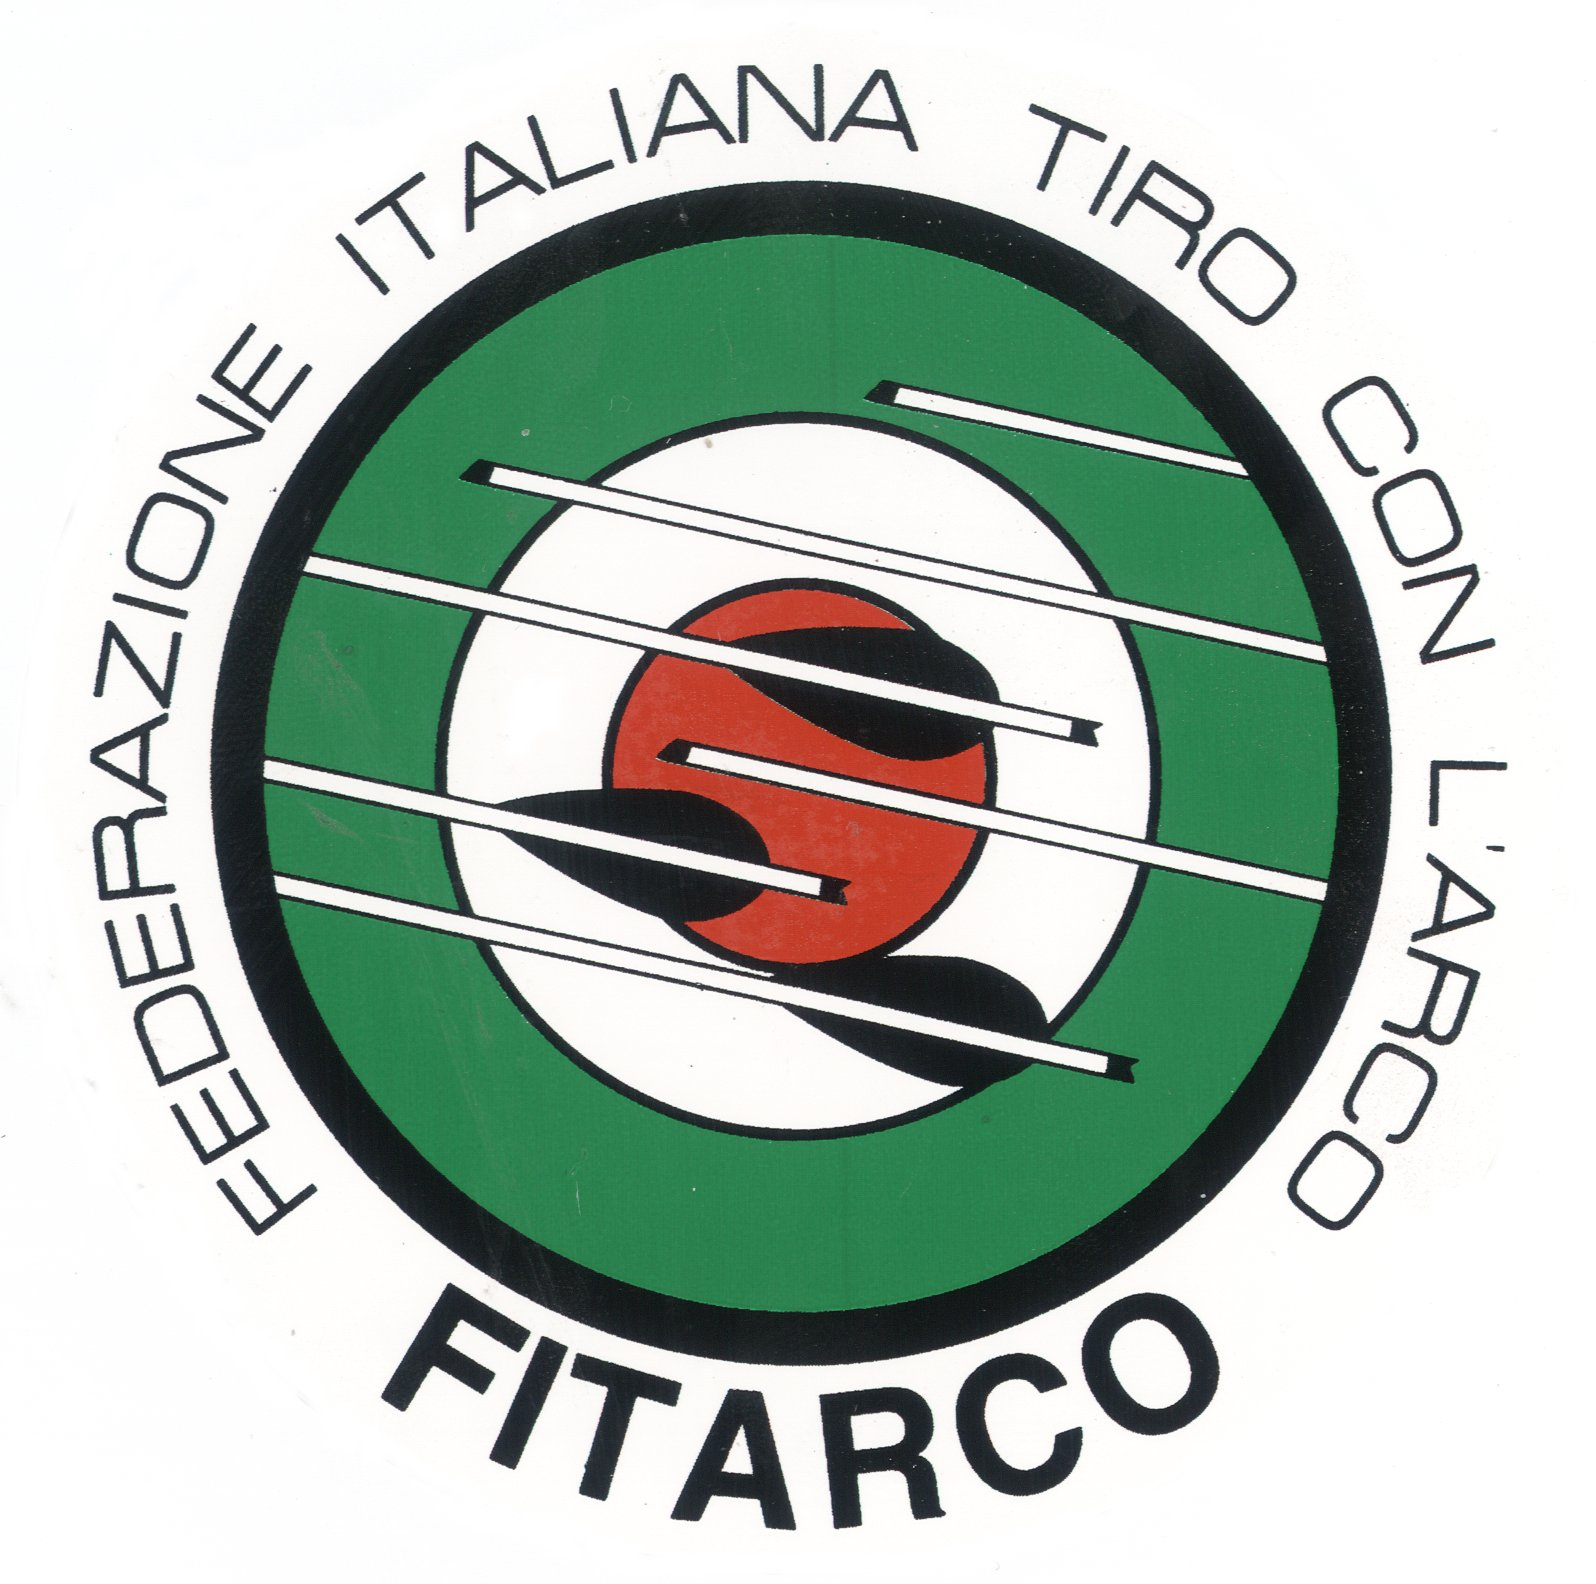 images/Fitarco_LOGO_copia.png